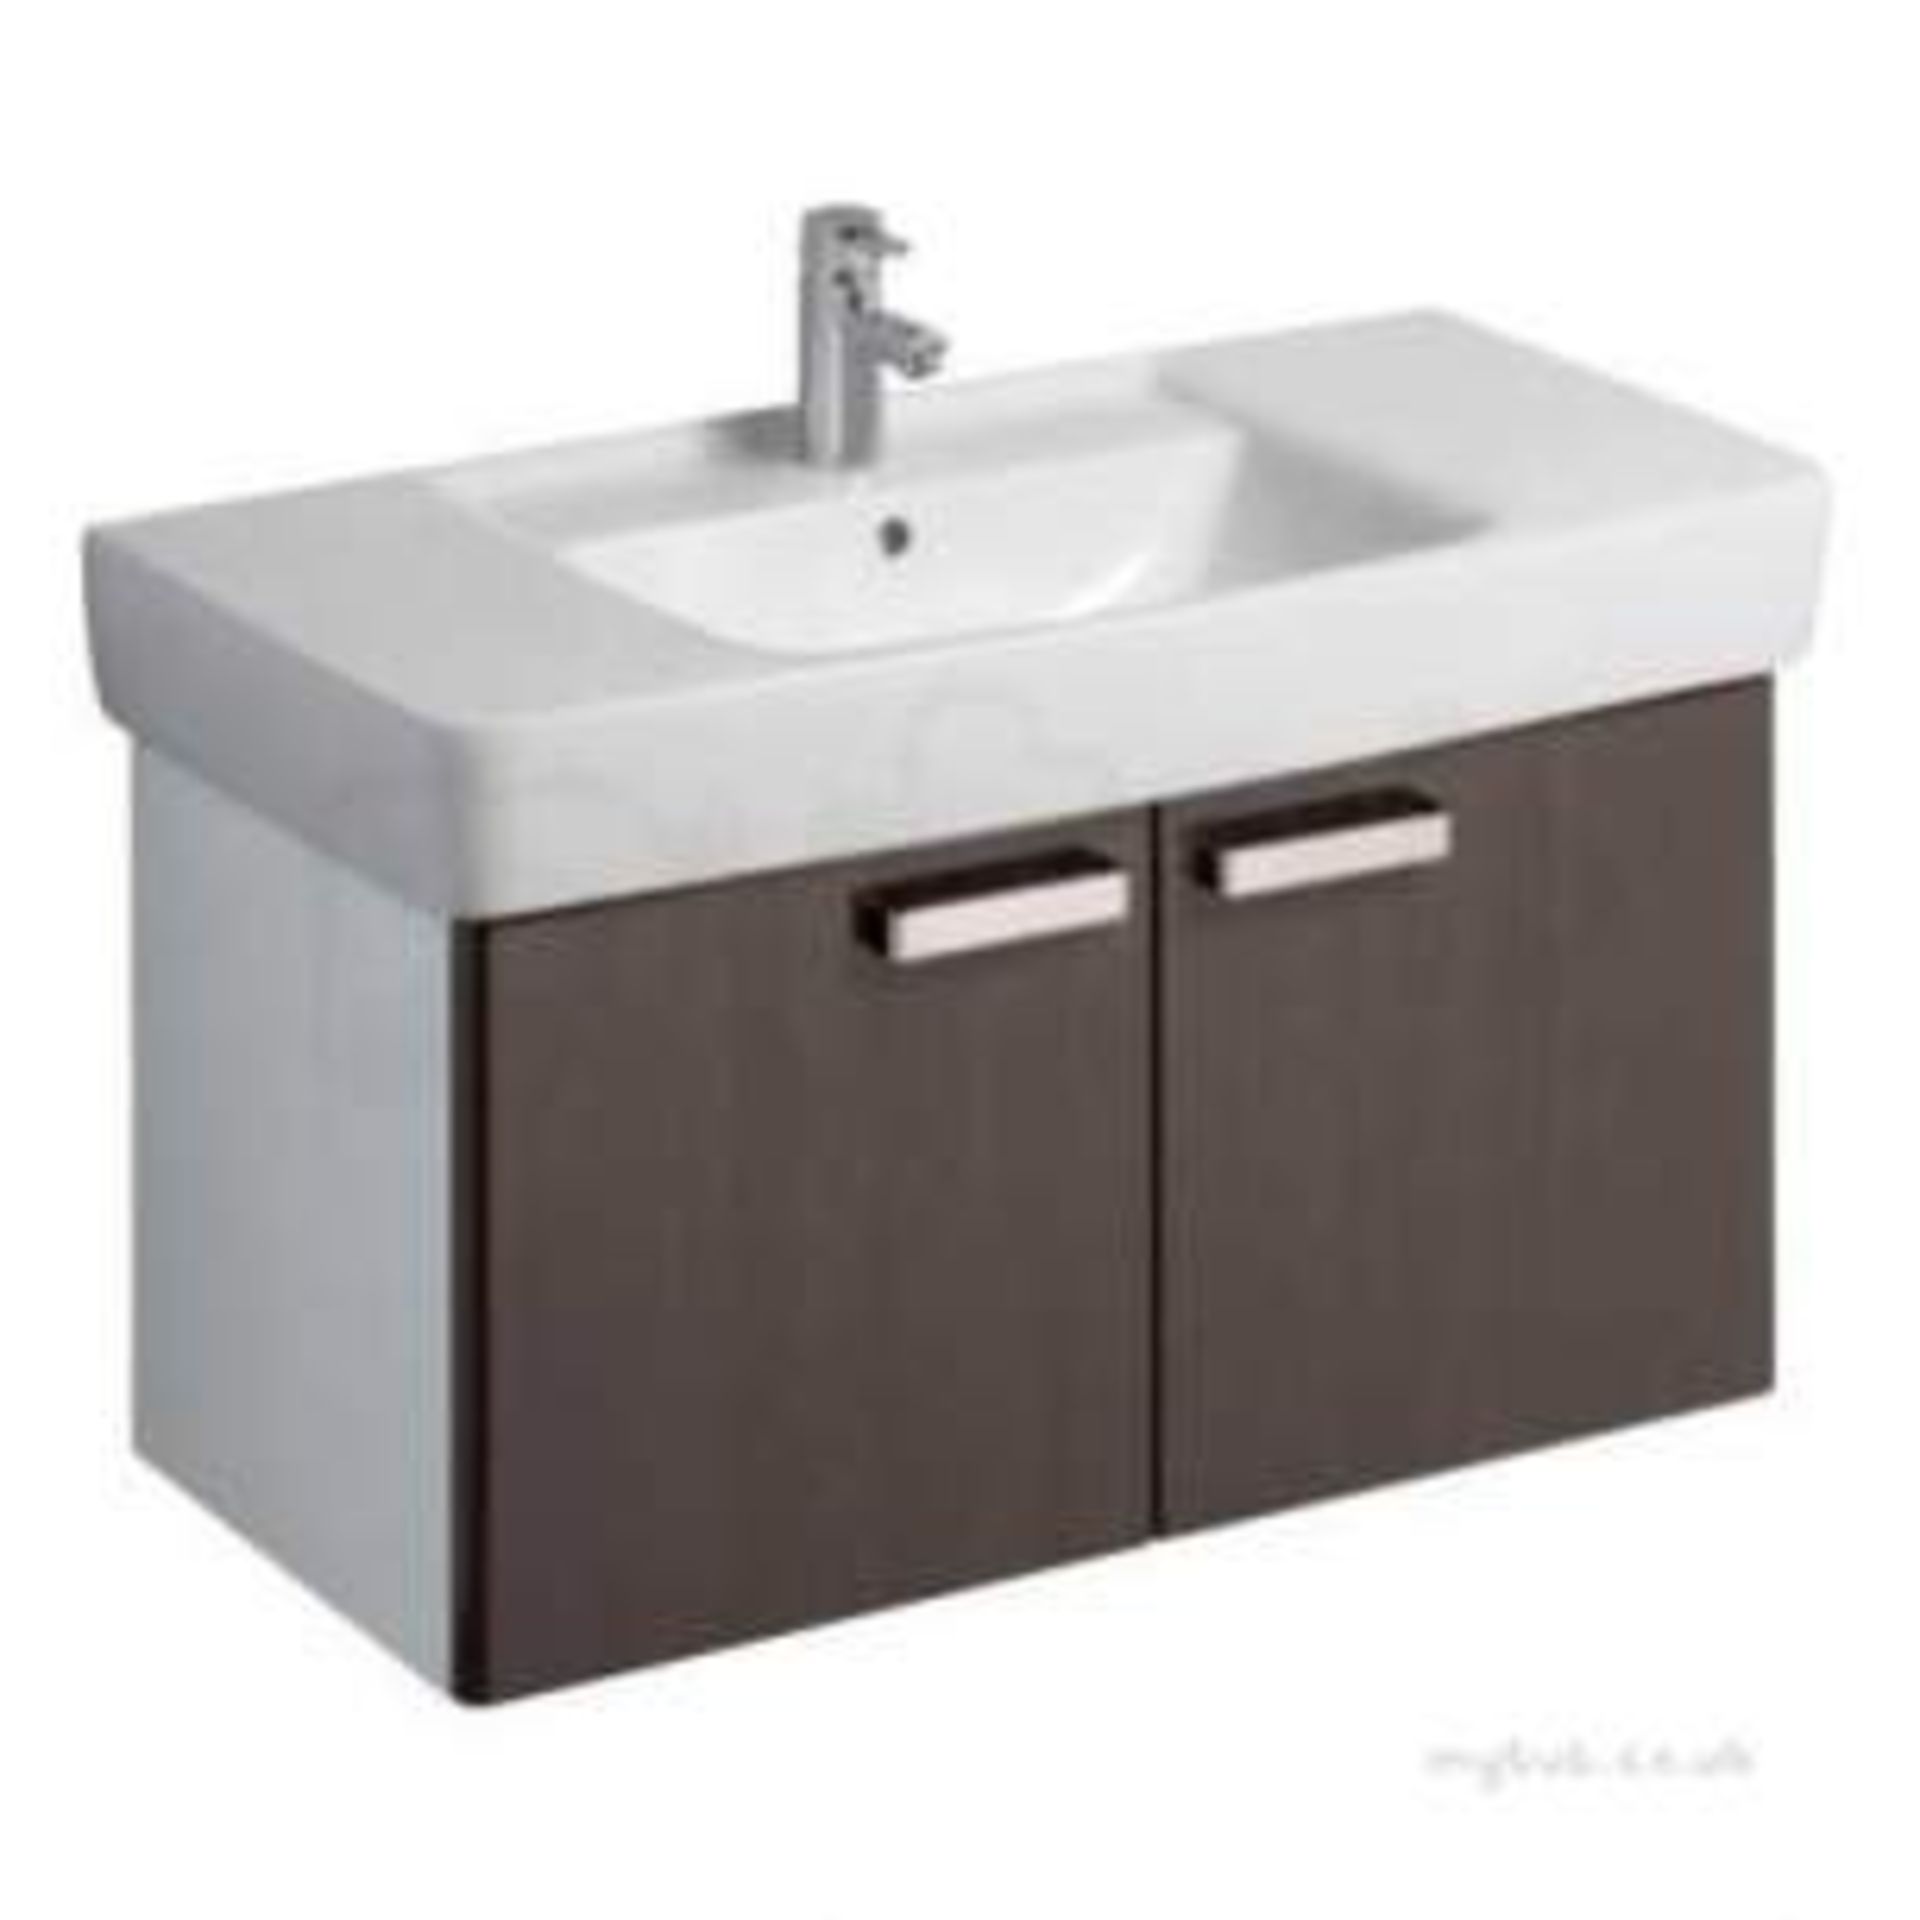 NEW Keramag 500mm Walnut Unit Wenge. RRP £499.99. COMES COMPLETE WITH BASIN. Gl0173we. Wenge ... - Image 2 of 2